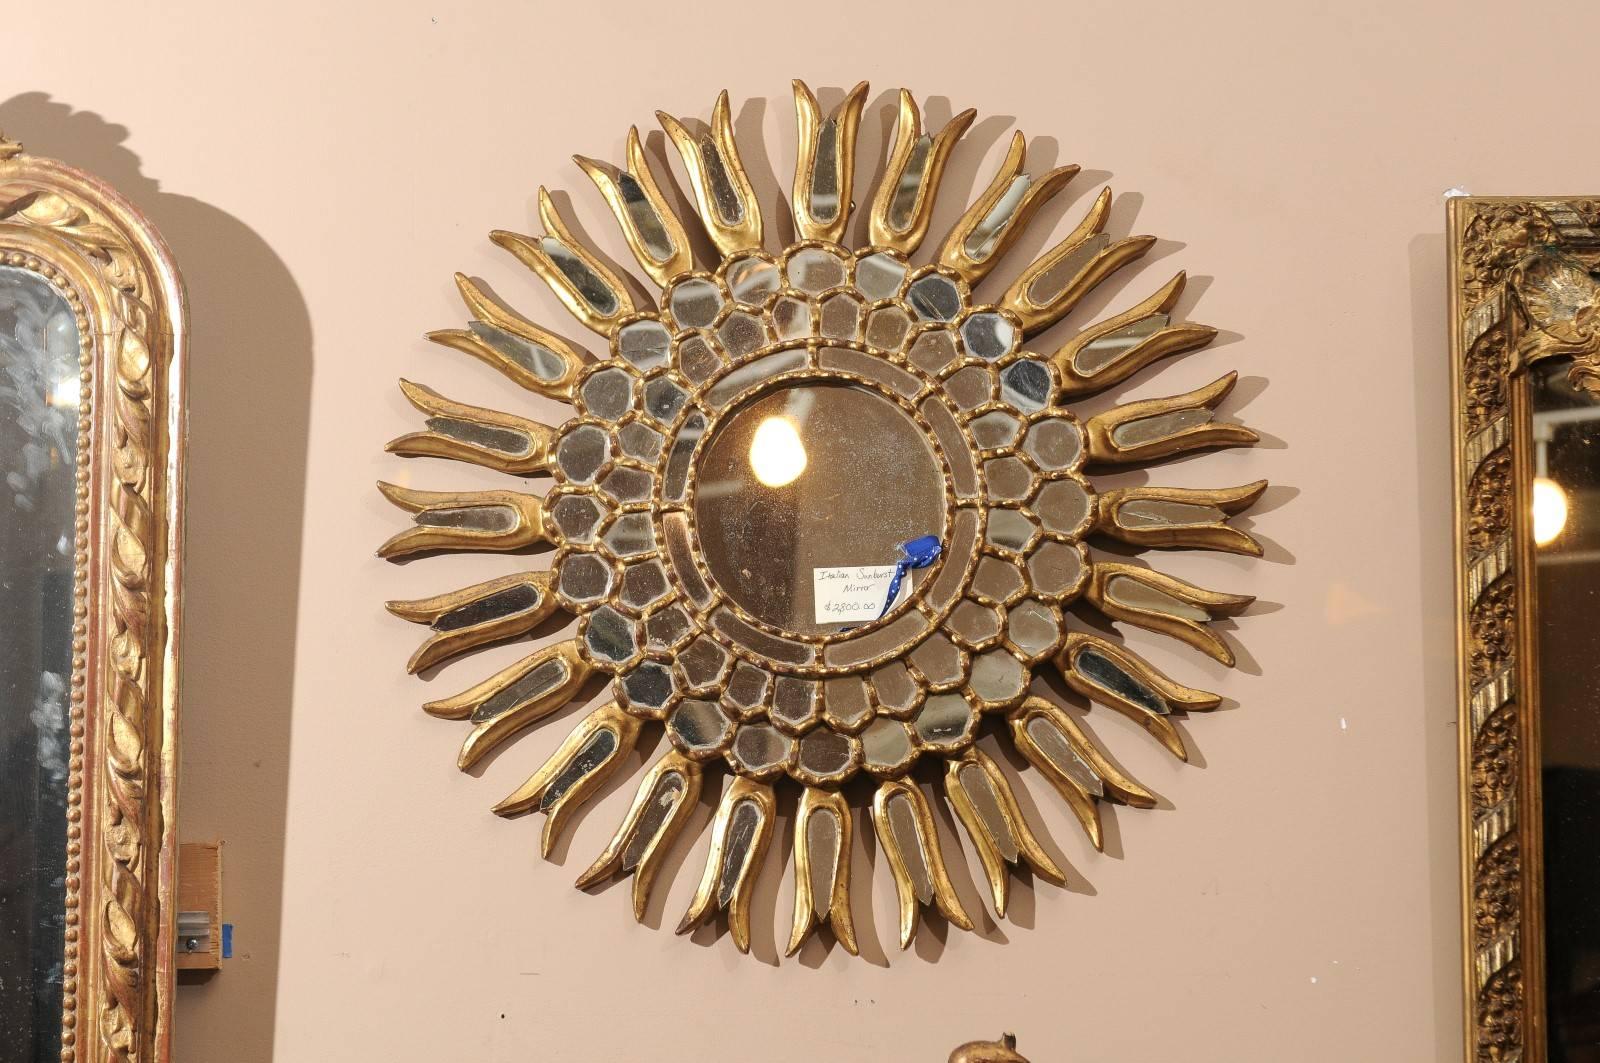 A stunning carved and gilt sunburst mirror. The piece has a great overall shape with three rows of small mirror insets surrounding the centre mirror. Sunburst mirrors Stand well alone or look great in a collection on a wall of varying shapes and